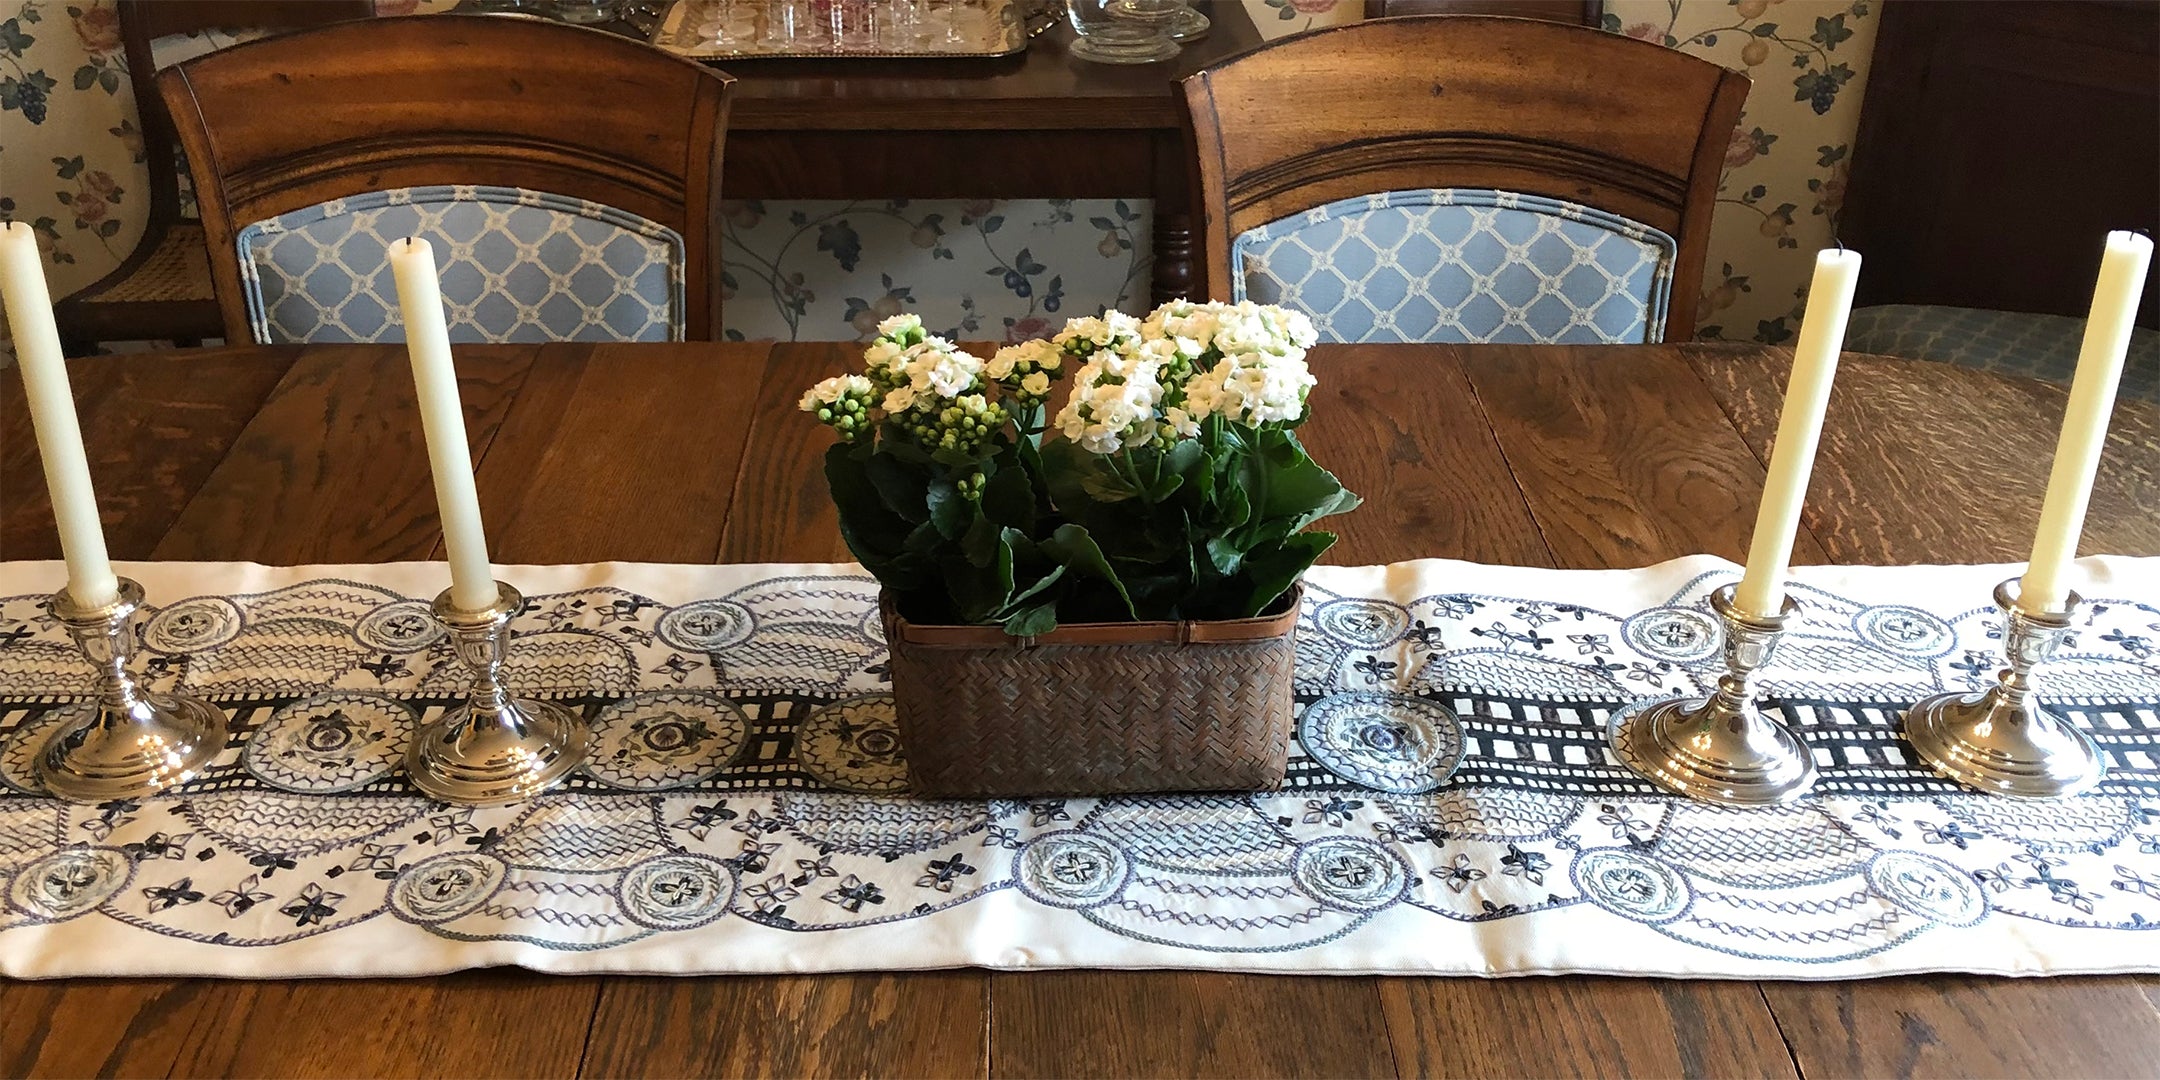 Beautiful hand-embroidered table runners for a good cause!